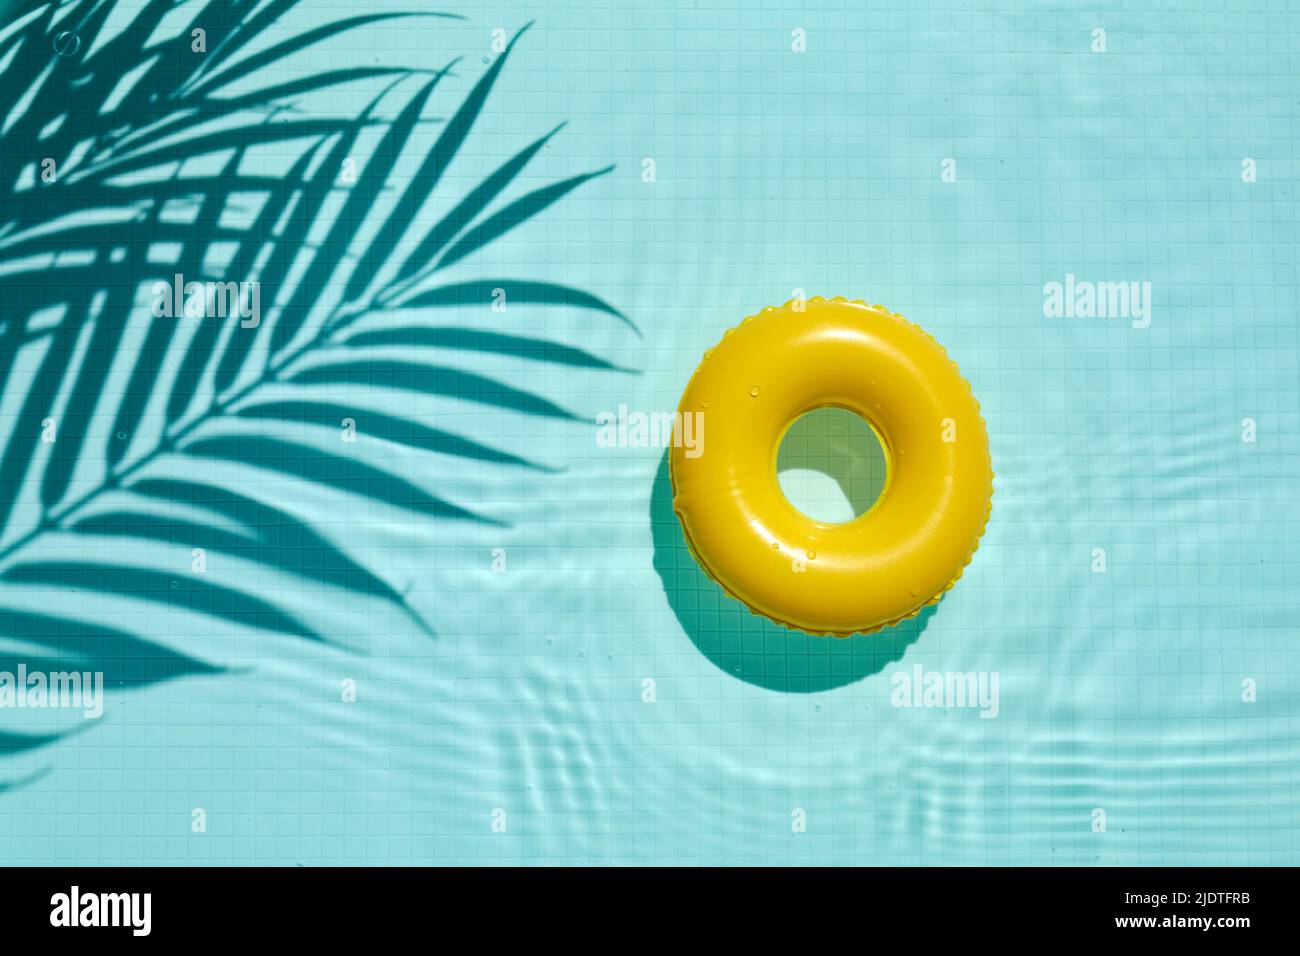 Swimming pool top view background. Water ring and palm shadows. Stock Photo